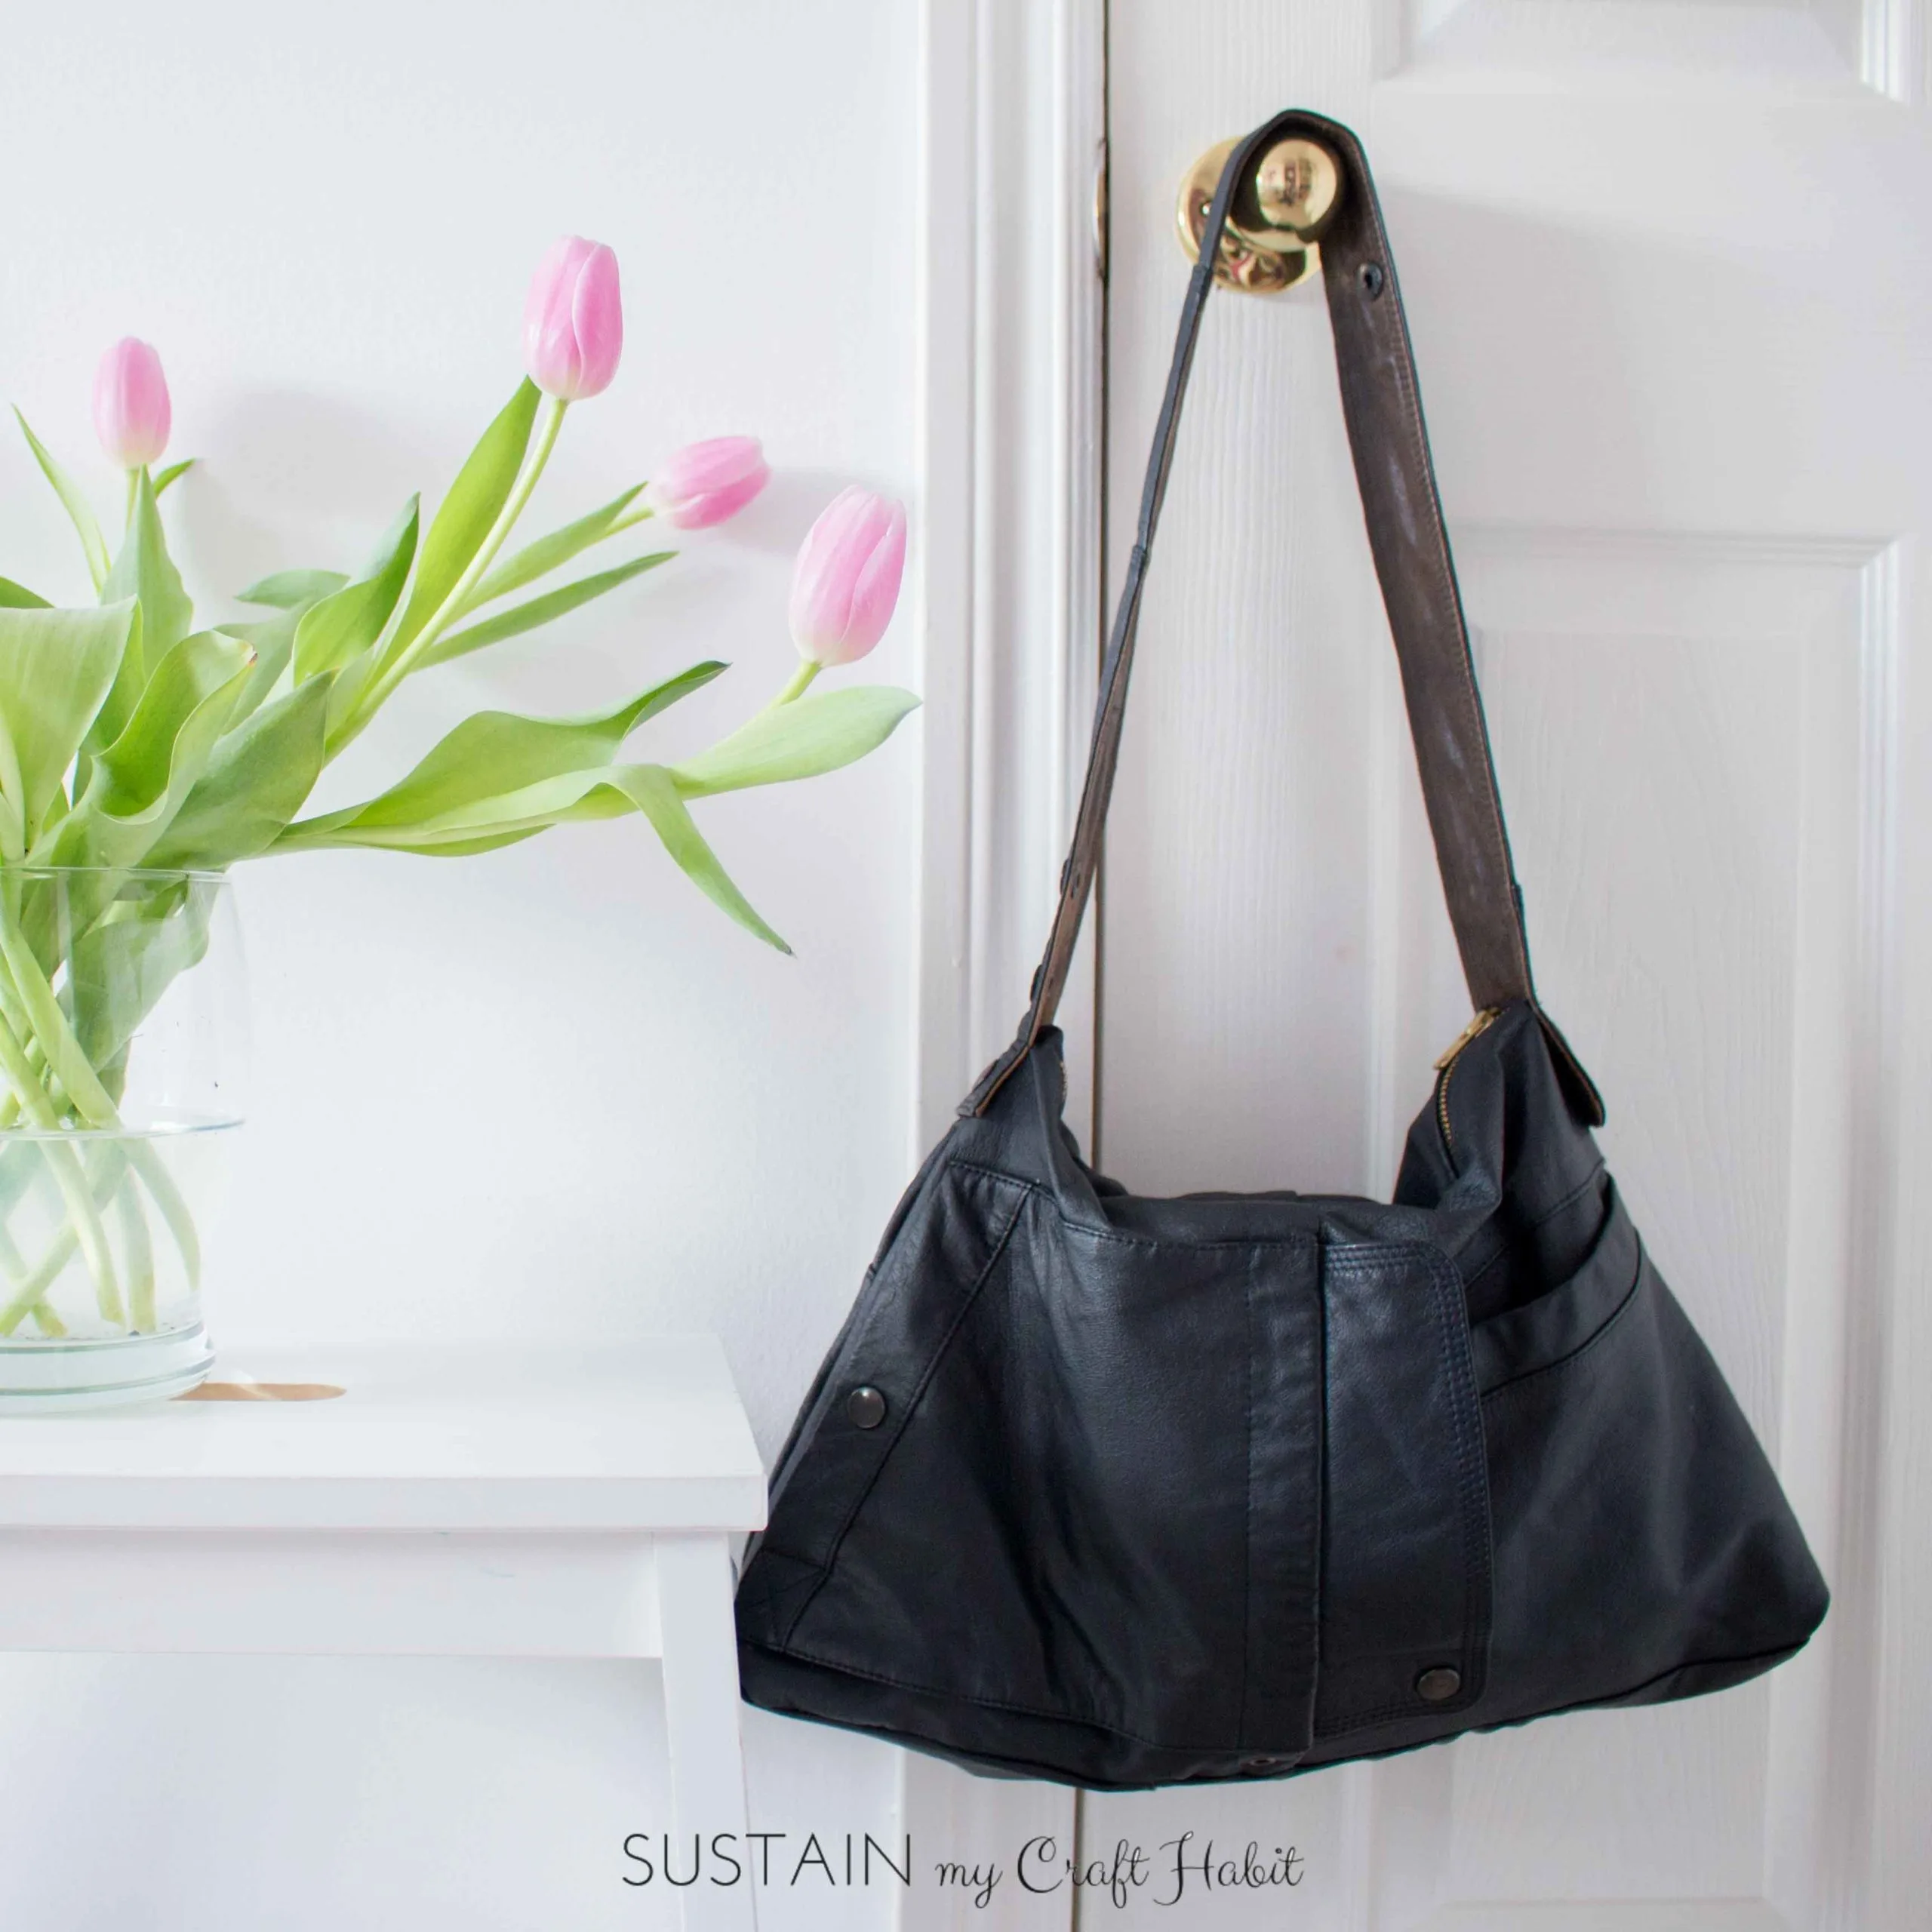 who new it could be so easy? #leathertok #quickfixes #thriftfix #susta, Leather  Bag